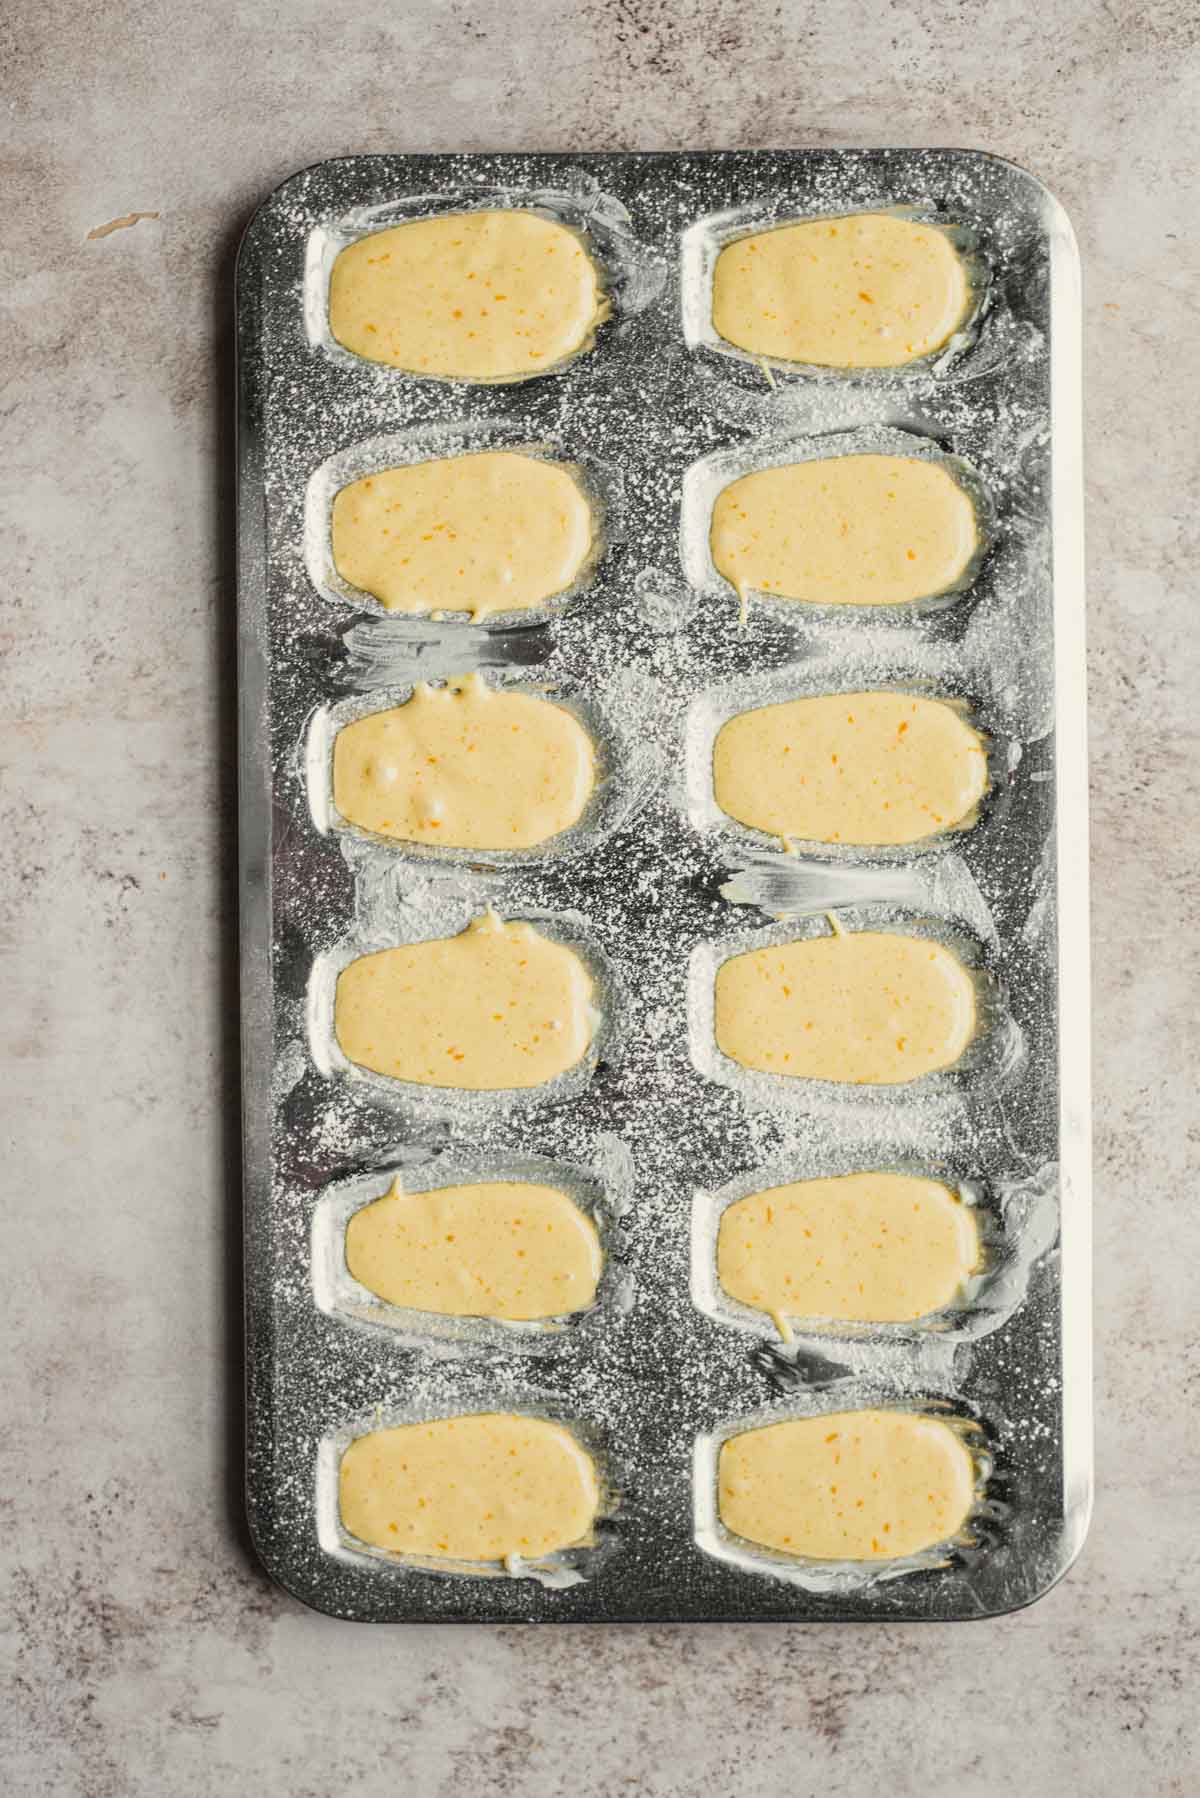 The batter for French madeleines in Madeleine mold.